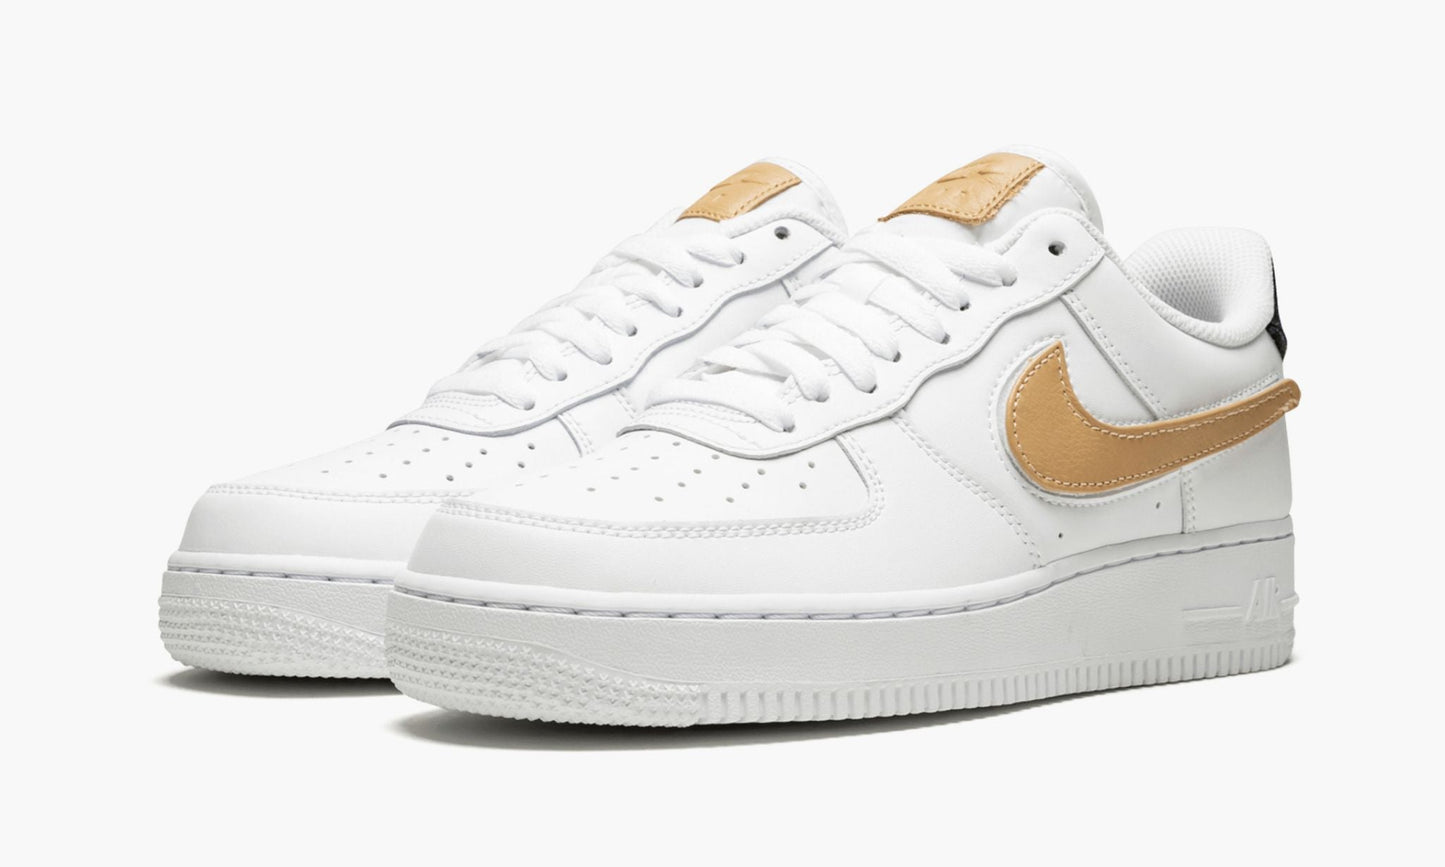 Air Force 1 ' 07 LV8 3 "Removable Swoosh"